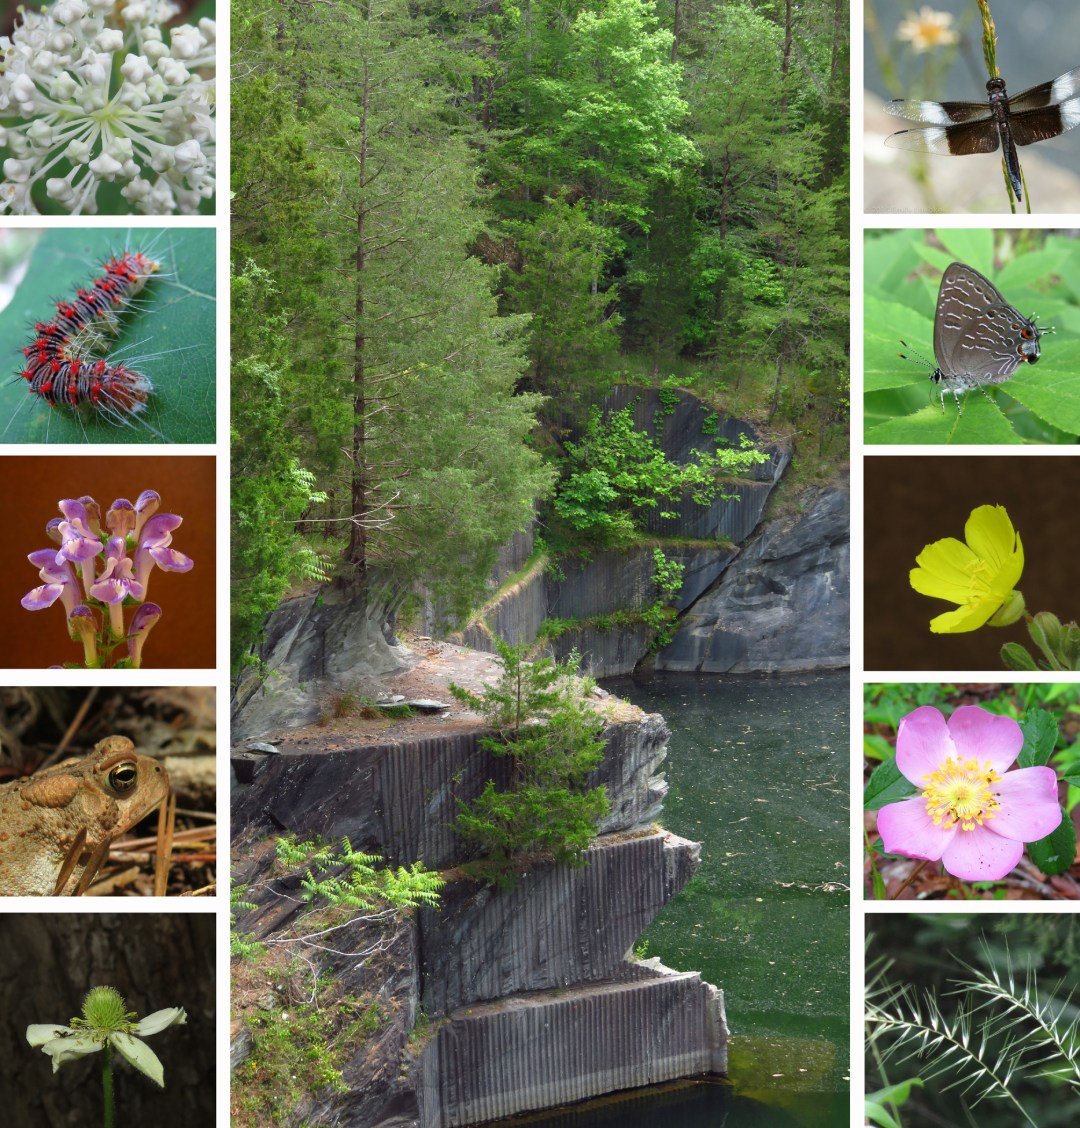 Flora and fauna thrive at the quarry gardens in Virginia due to soapstone mineral deposits